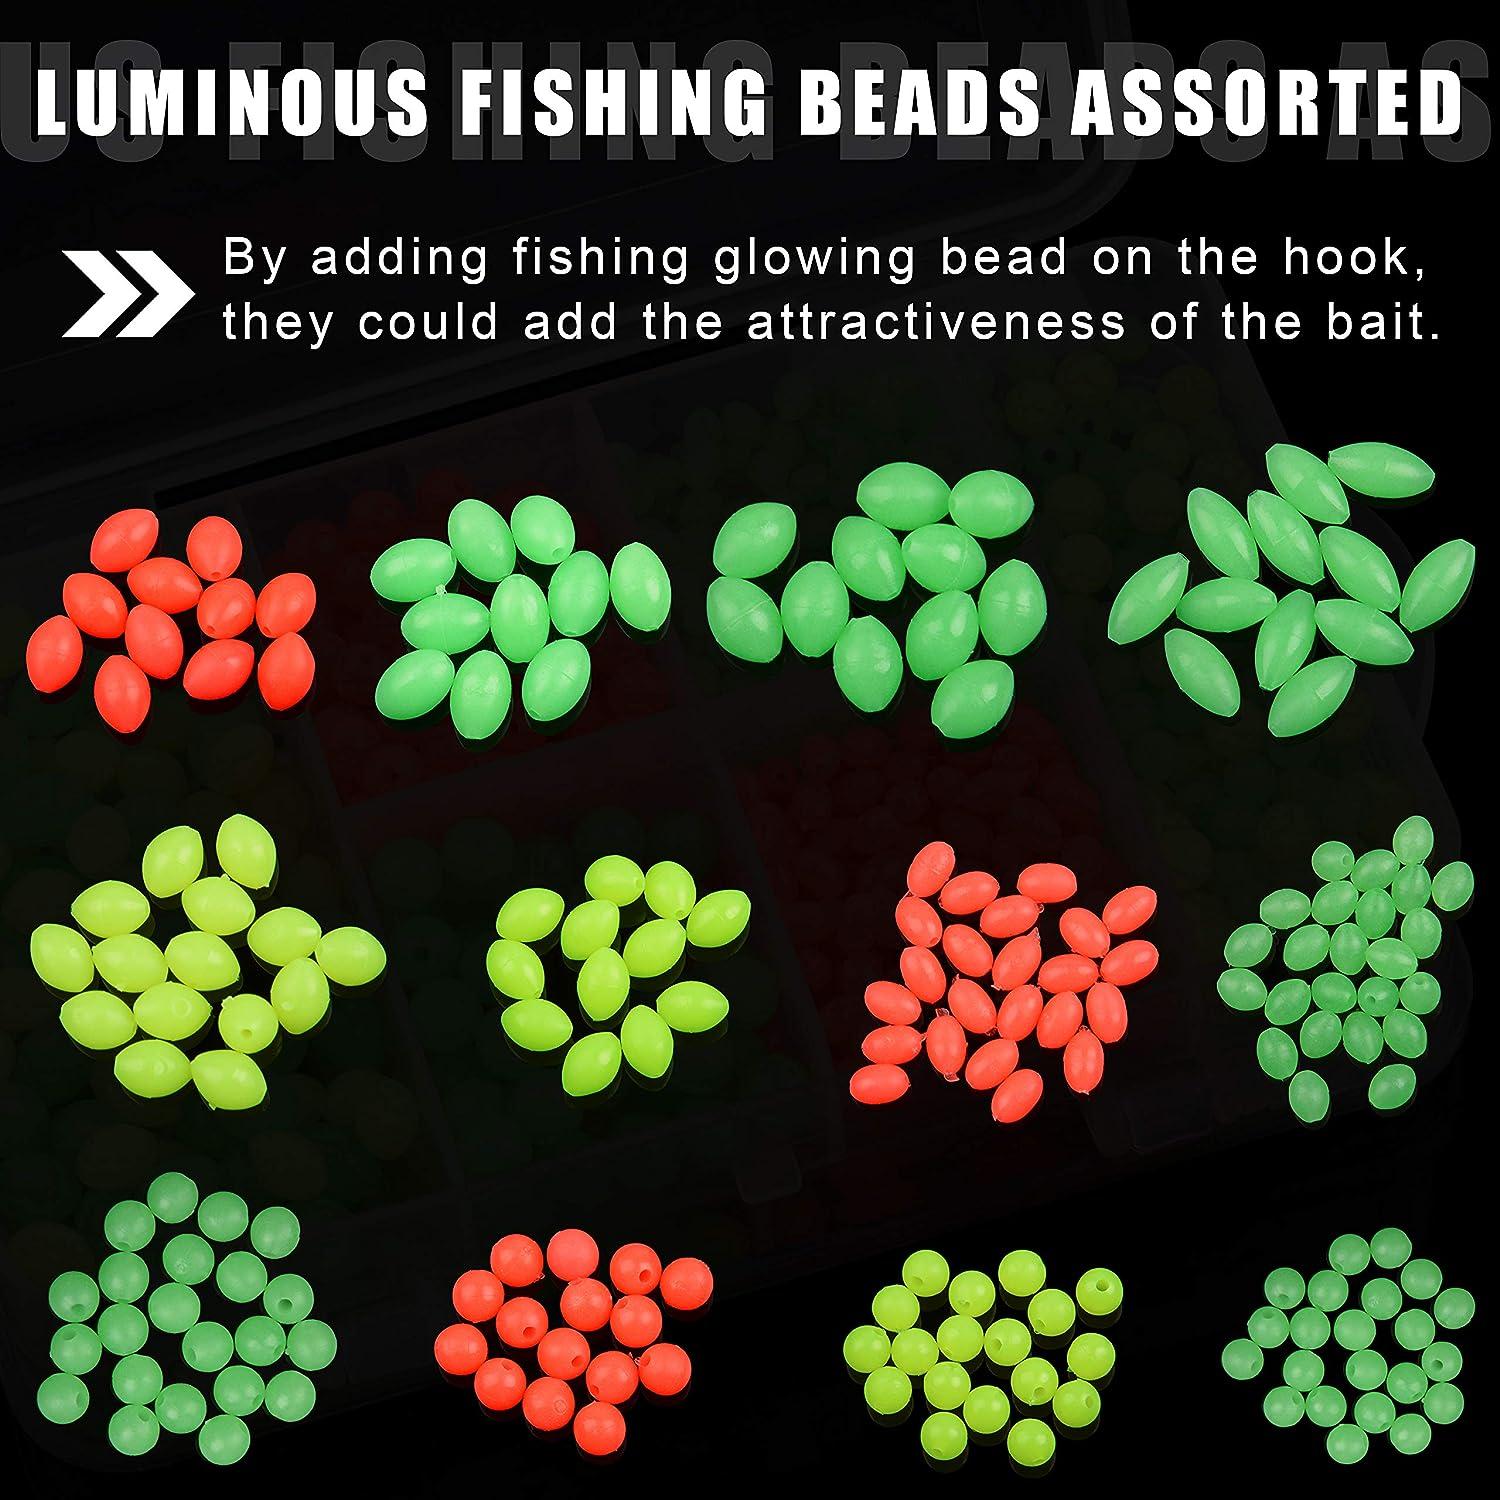 SILANON Soft Fishing Beads Assortment Kit,1000pcs Glow Beads Fishing Bait  Eggs Luminous Oval Round Plastic Rig Beads Fishing Tackle Saltwater for  Steelhead Trout